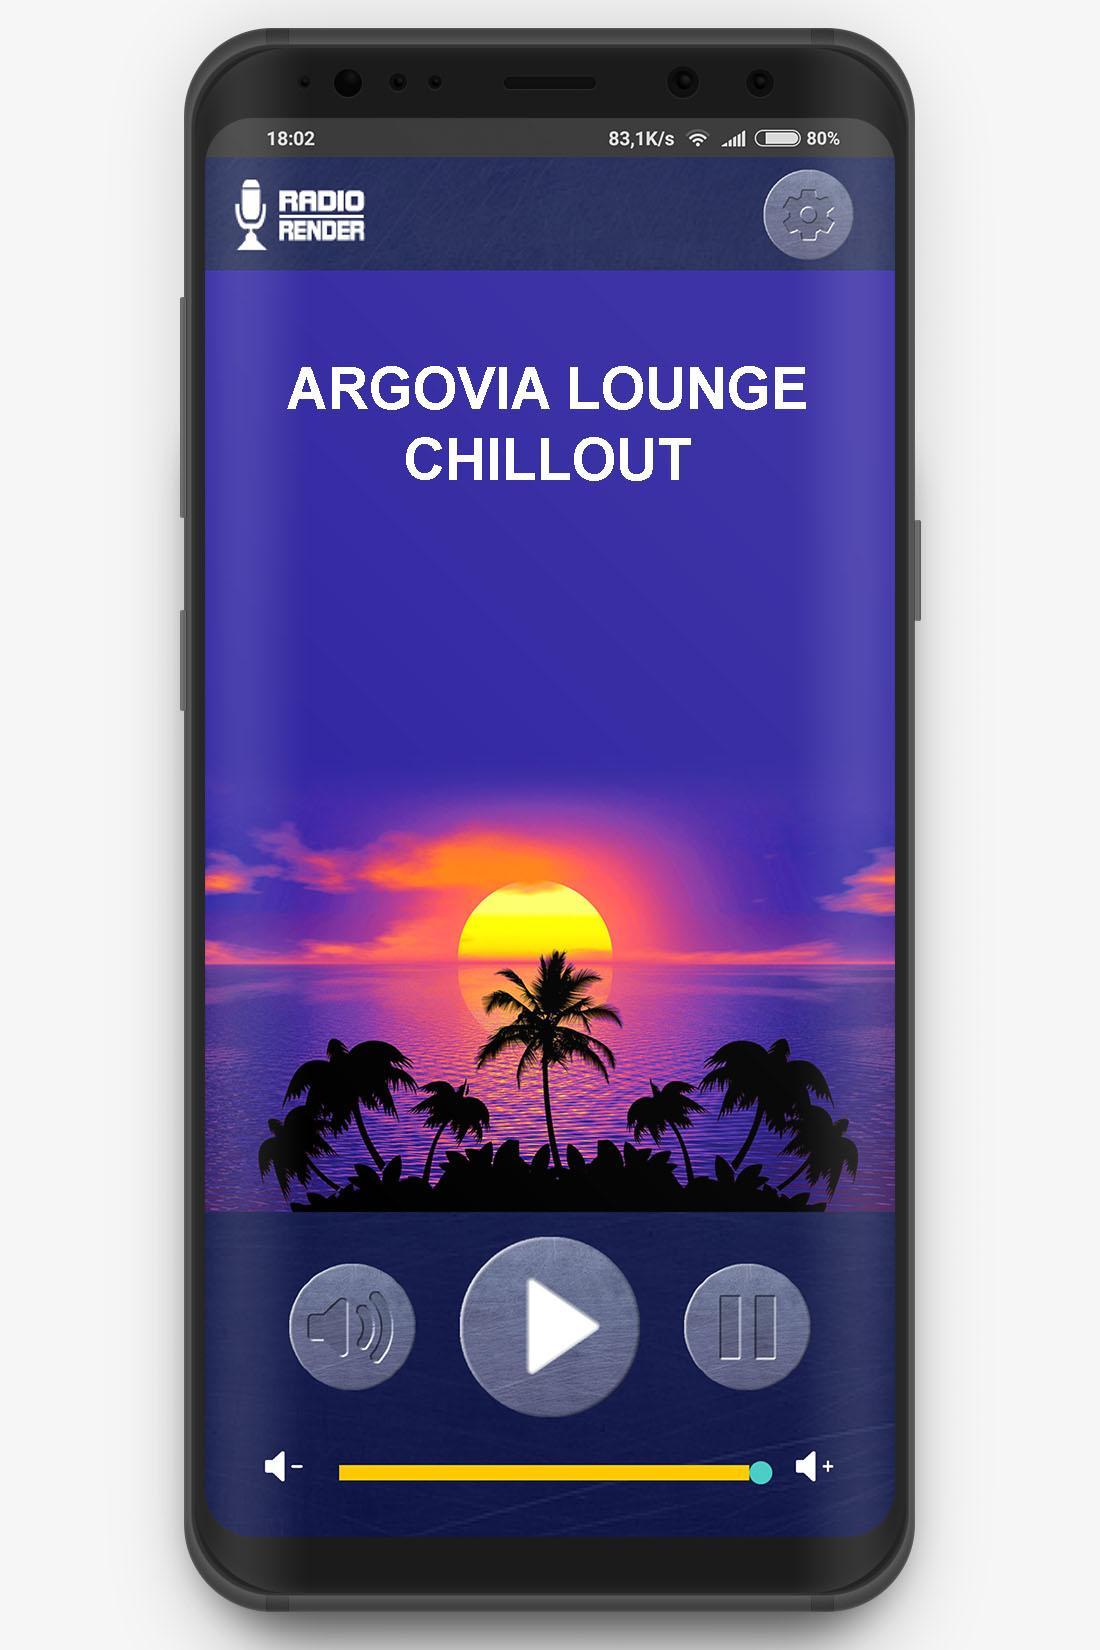 Argovia Lounge ChillOut Live Radio Station for Android - APK Download